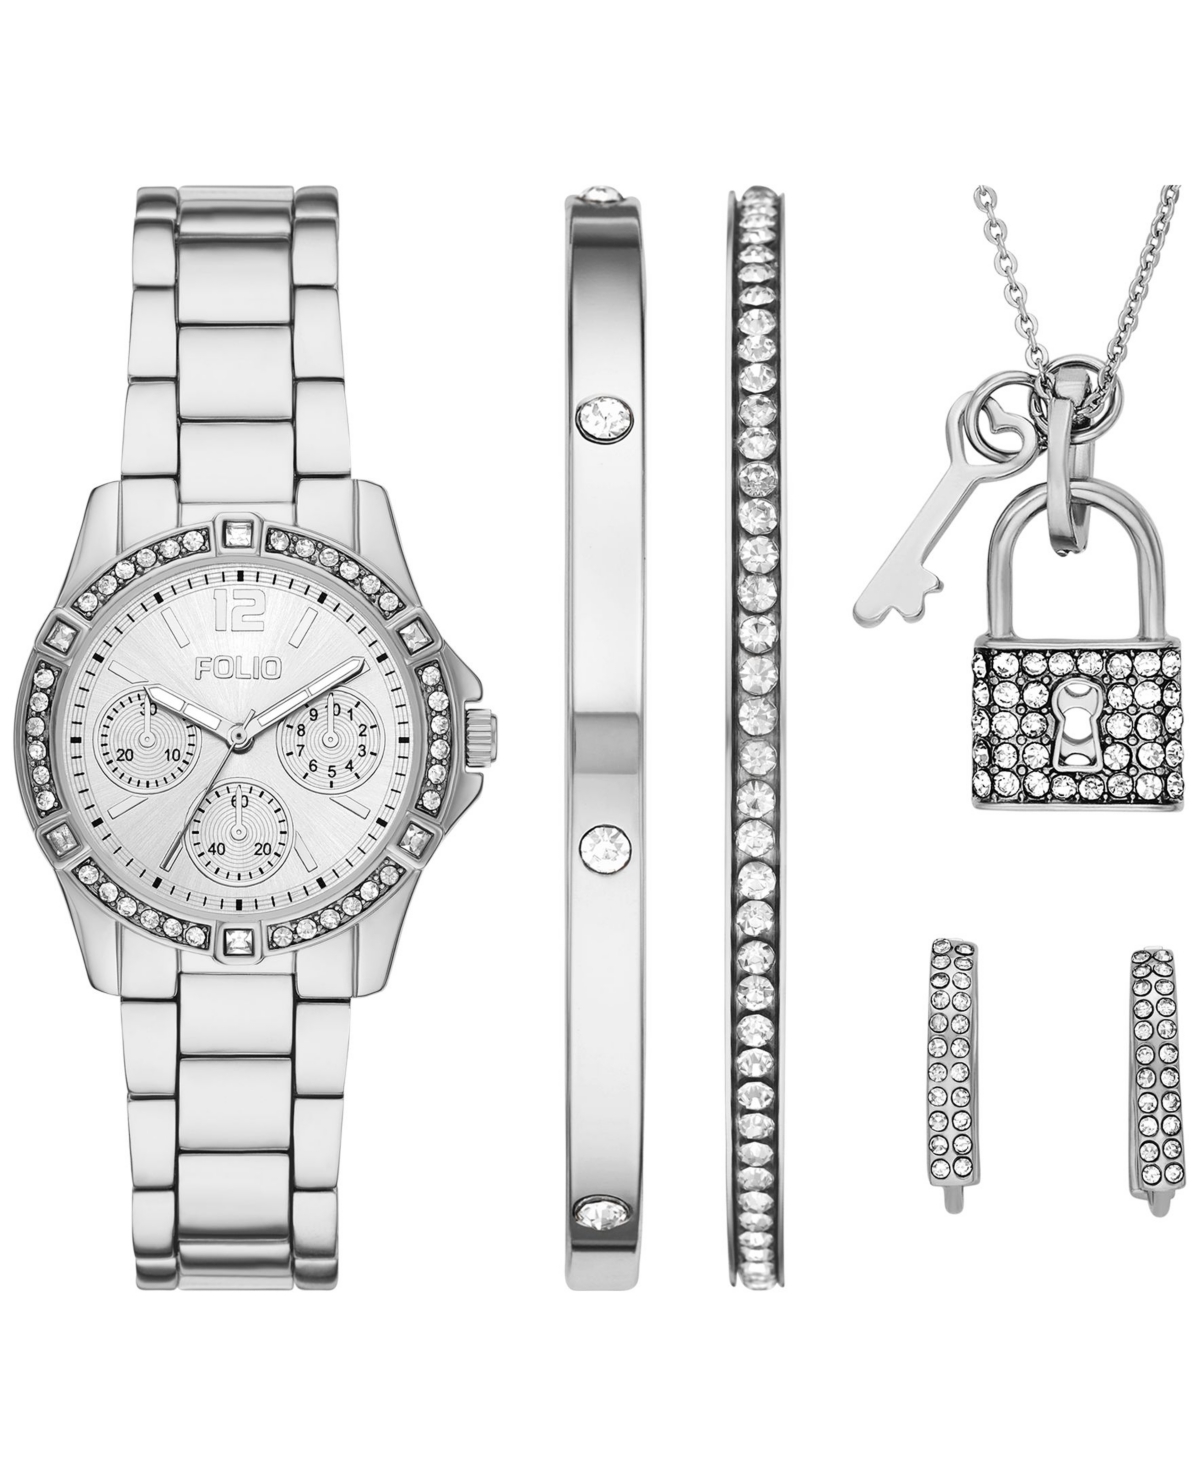 Women's Three Hand Silver-Tone Alloy Watch 33mm Gift Set - Silver-Tone